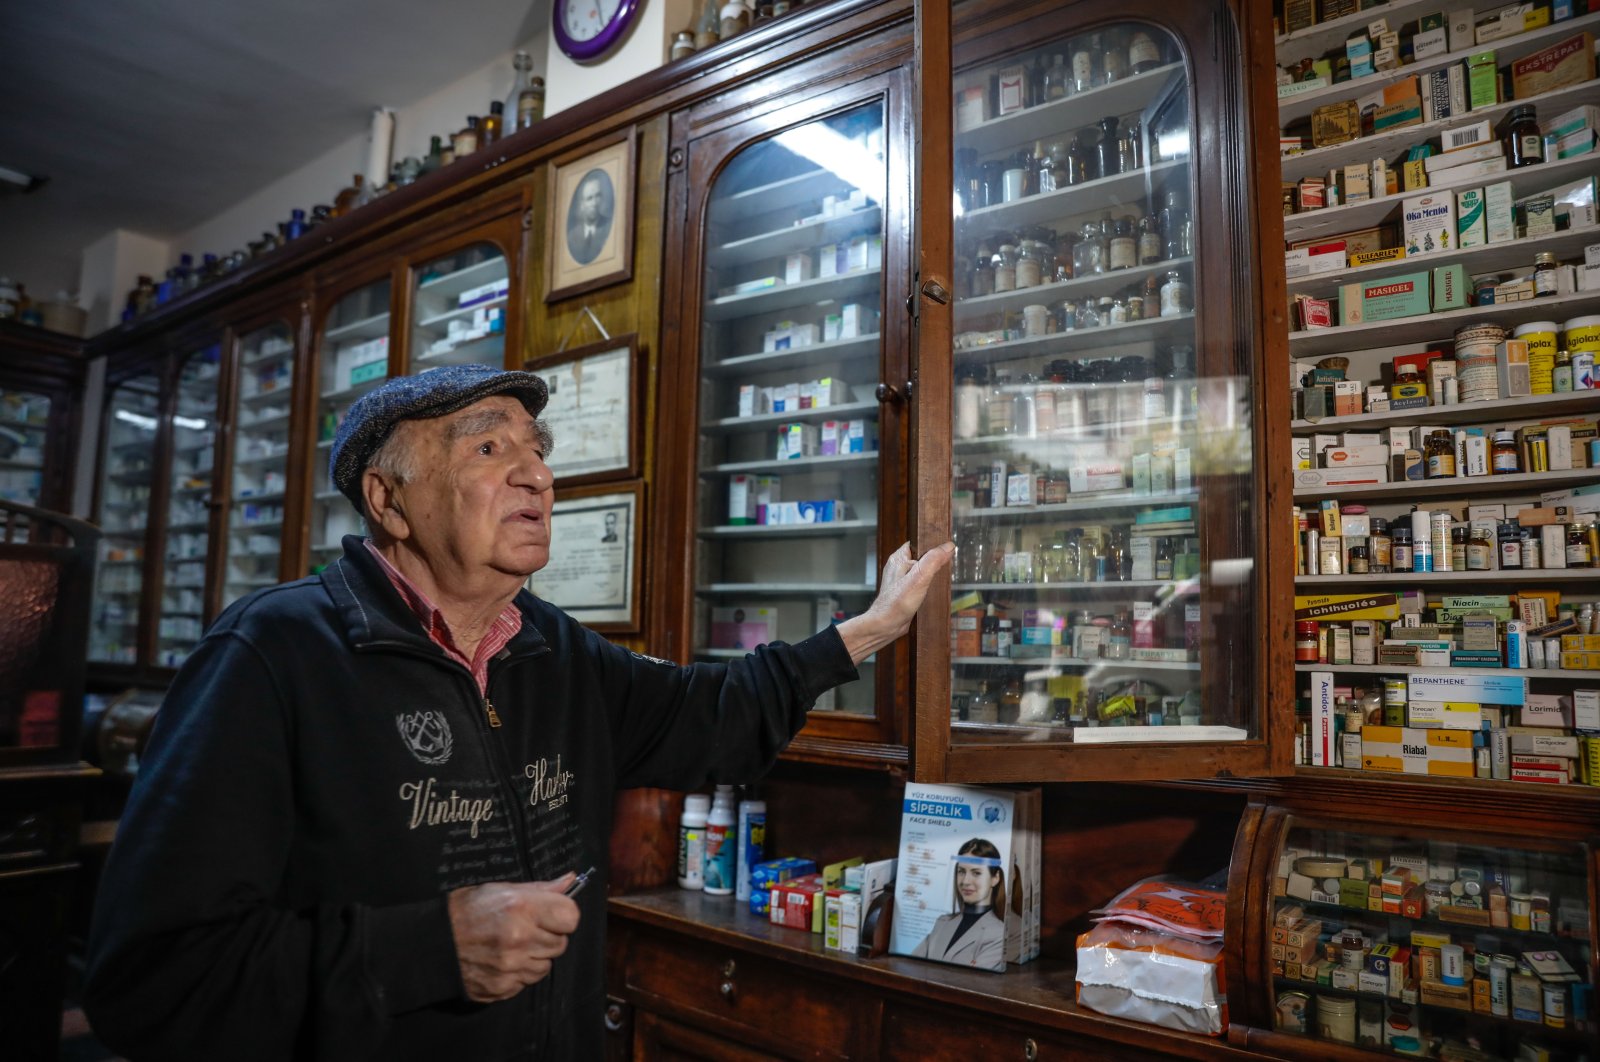 Melih Ziya Sezer shows the shelves filled with modern and ancient medicines at the pharmacy, in Istanbul, Turkey, Dec. 10, 2021. (DHA PHOTO)